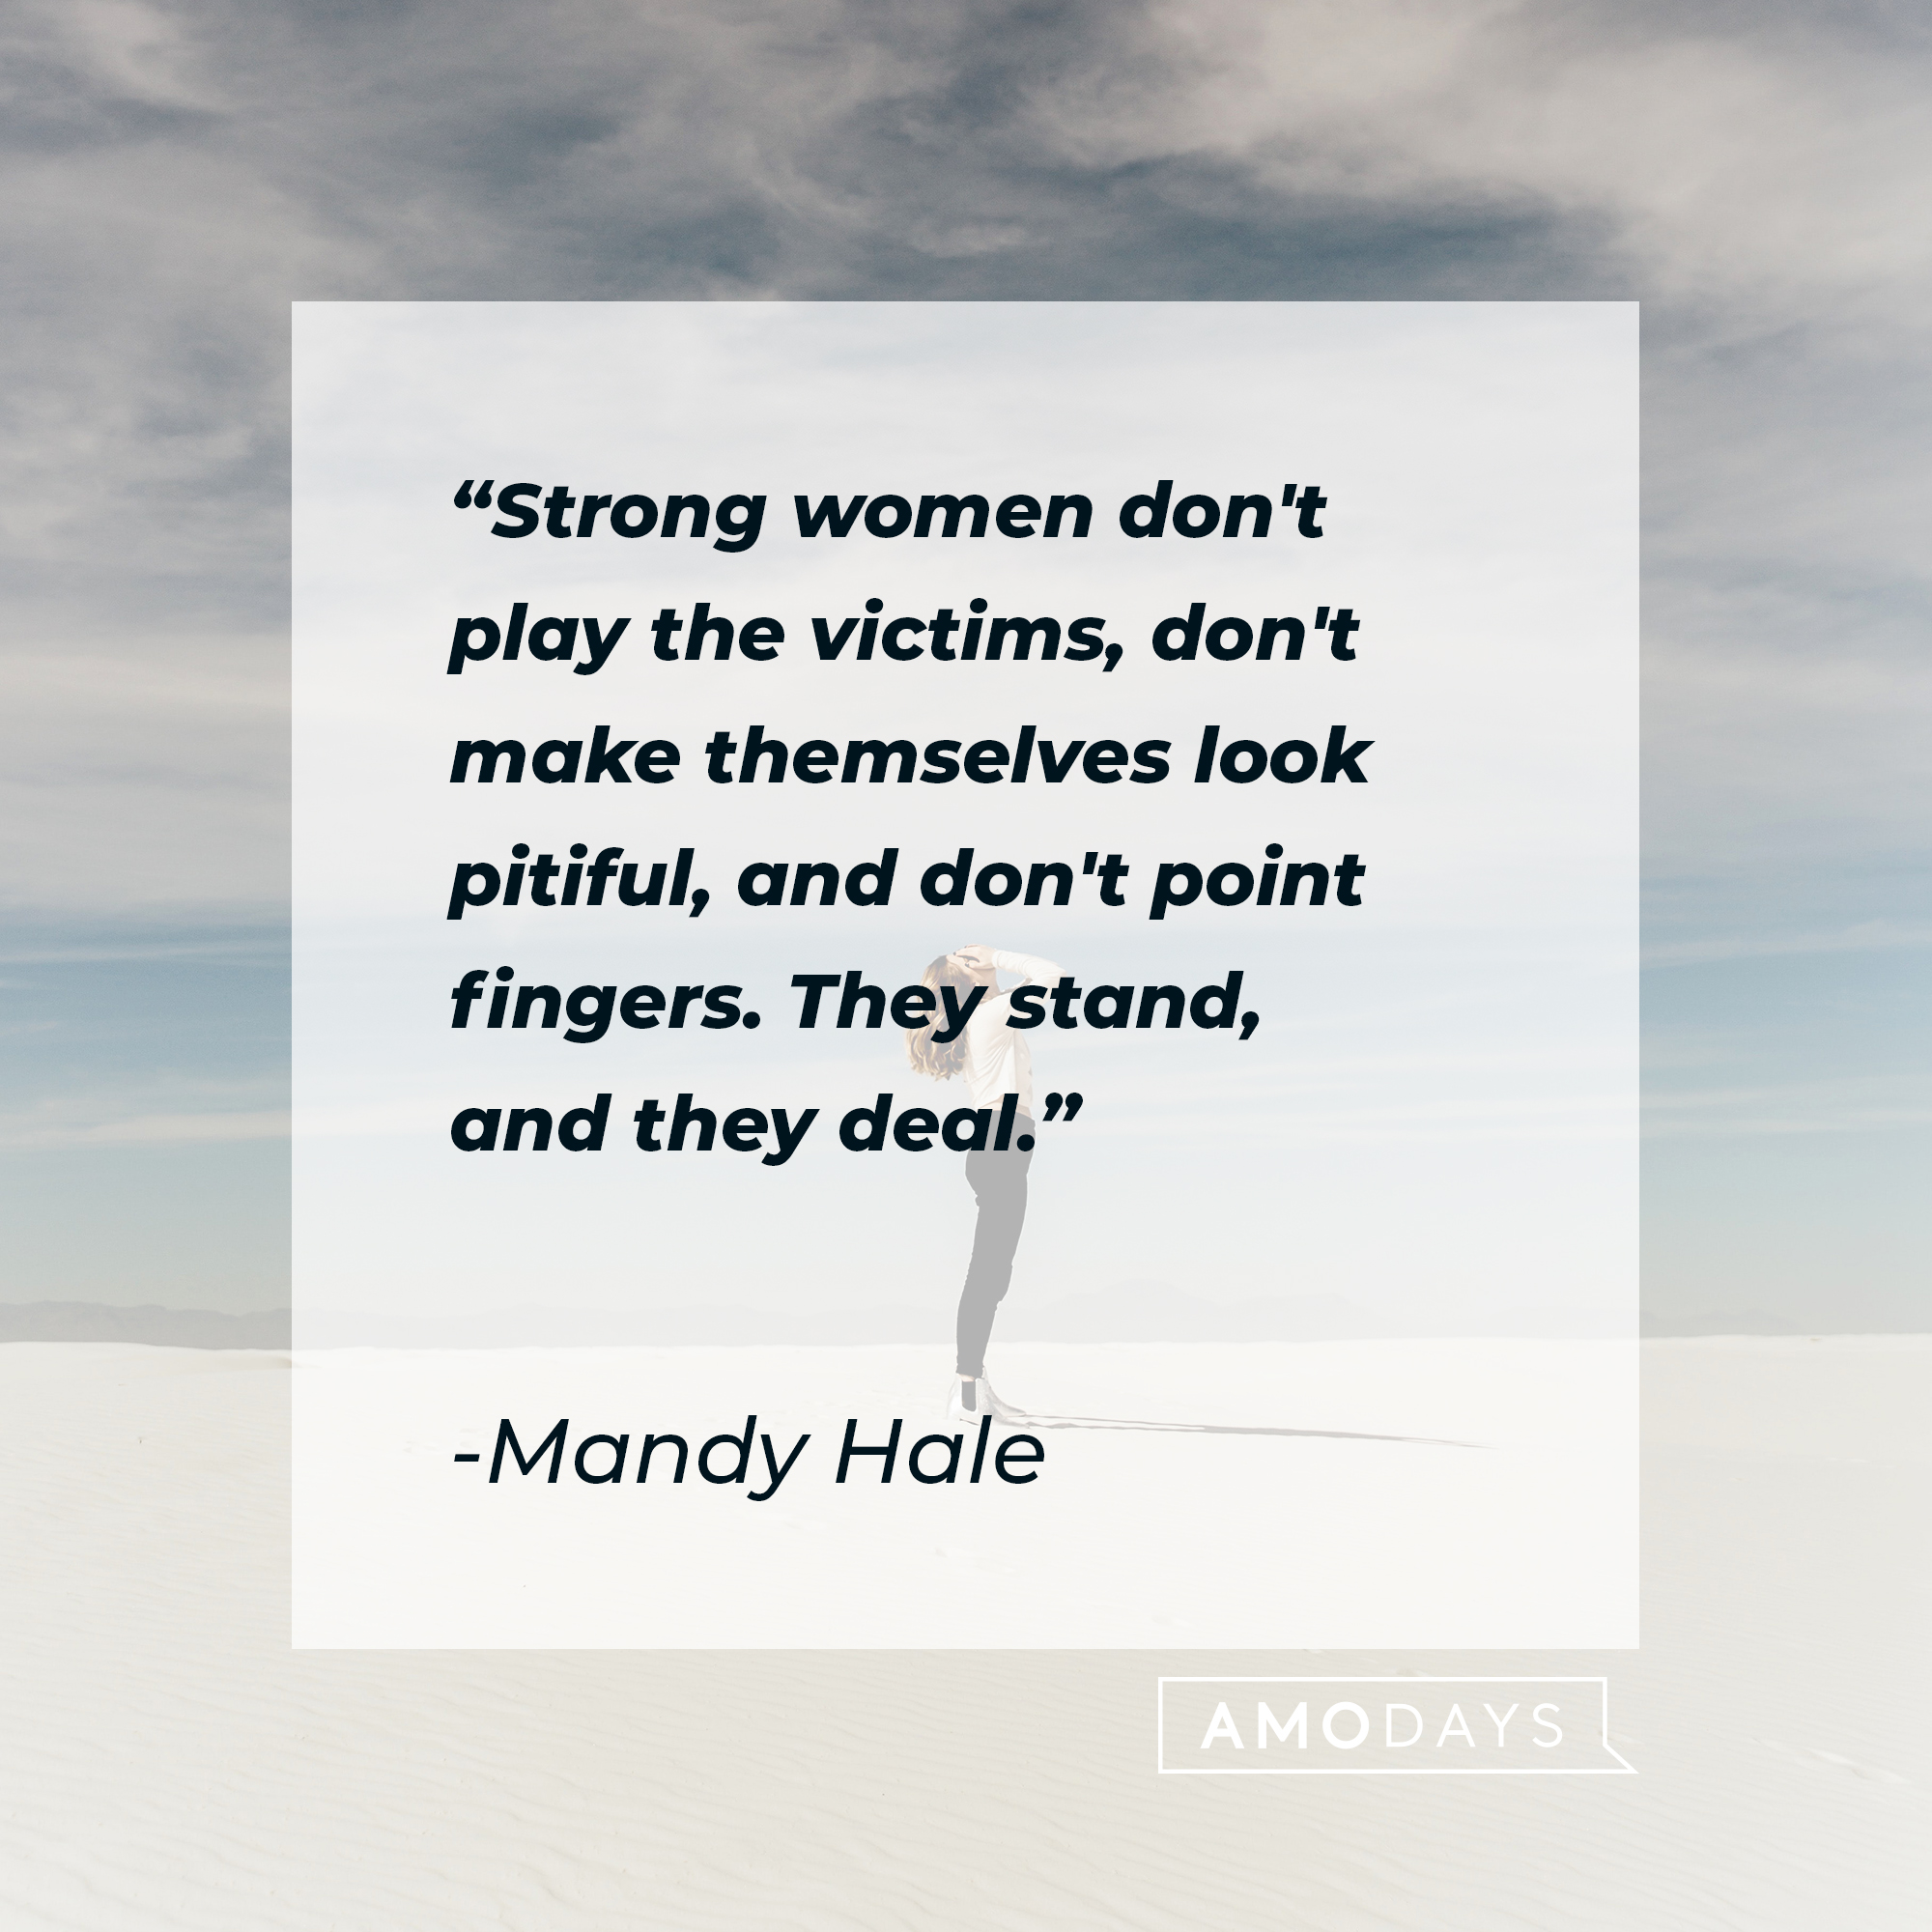 Mandy Hale's quote: "Strong women don't play the victims, don't make themselves look pitiful, and don't point fingers. They stand, and they deal." | Image: Unsplash.com